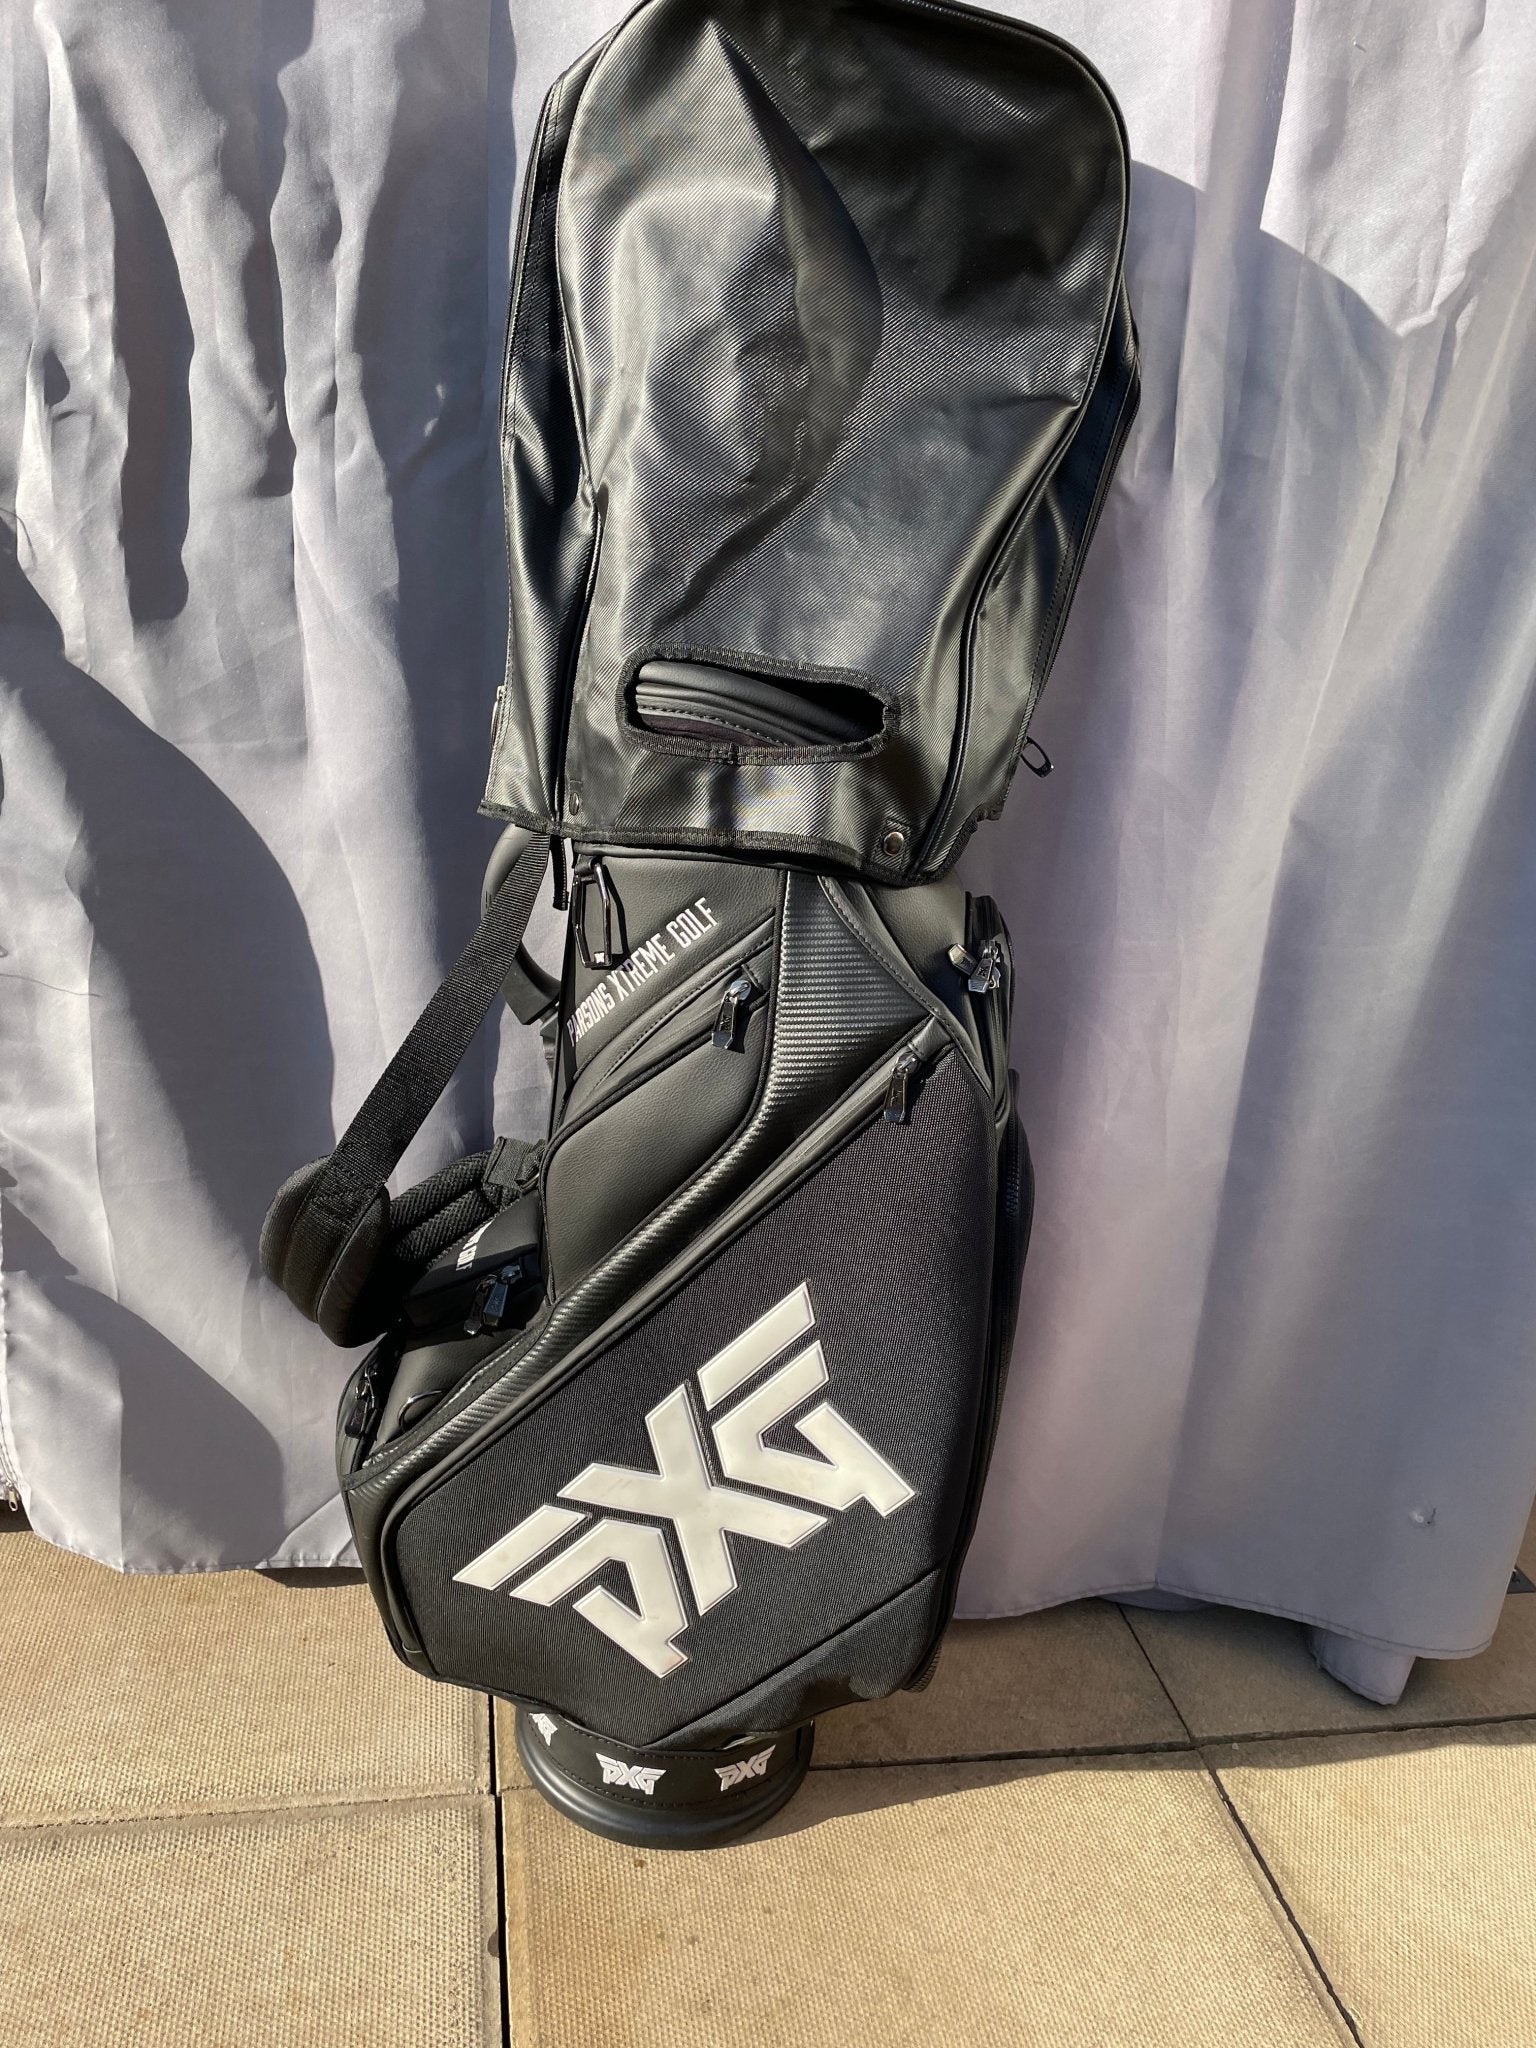 PXG Stunning Tour Bag with Rain Hood - only £165.00 Please read description before purchasing! - Golf Store UK